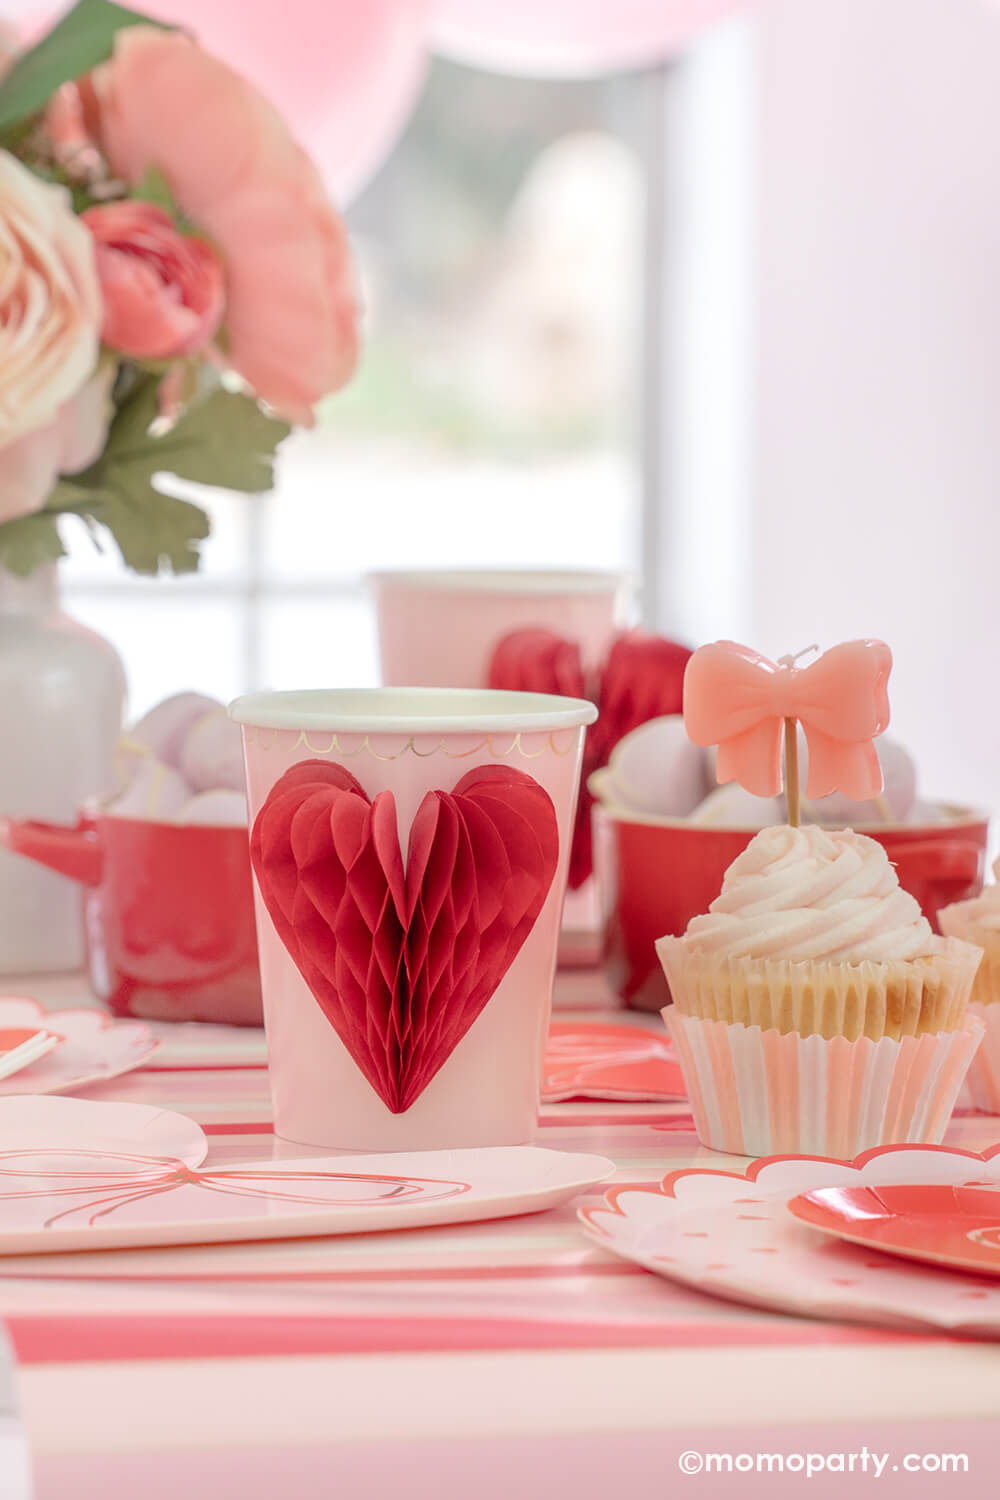 A close-up detail of Momo Party's sweet Pink and Red Bow-Themed Valentine's Day Party table. Highlighting Meri Meri Honeycomb Heart Cups, these cups feature charming 3D honeycomb red hearts on pink paper, adorned with gold foil details. Accompanied by a Pink Bow Candle atop a cupcake and sweets in the red Mini Cocotte, with a flower vase behind them. All elegantly arranged on a red-striped paper runner. Such a cute idea for elevating your Valentine's celebration or Galentine's Day with your besties.